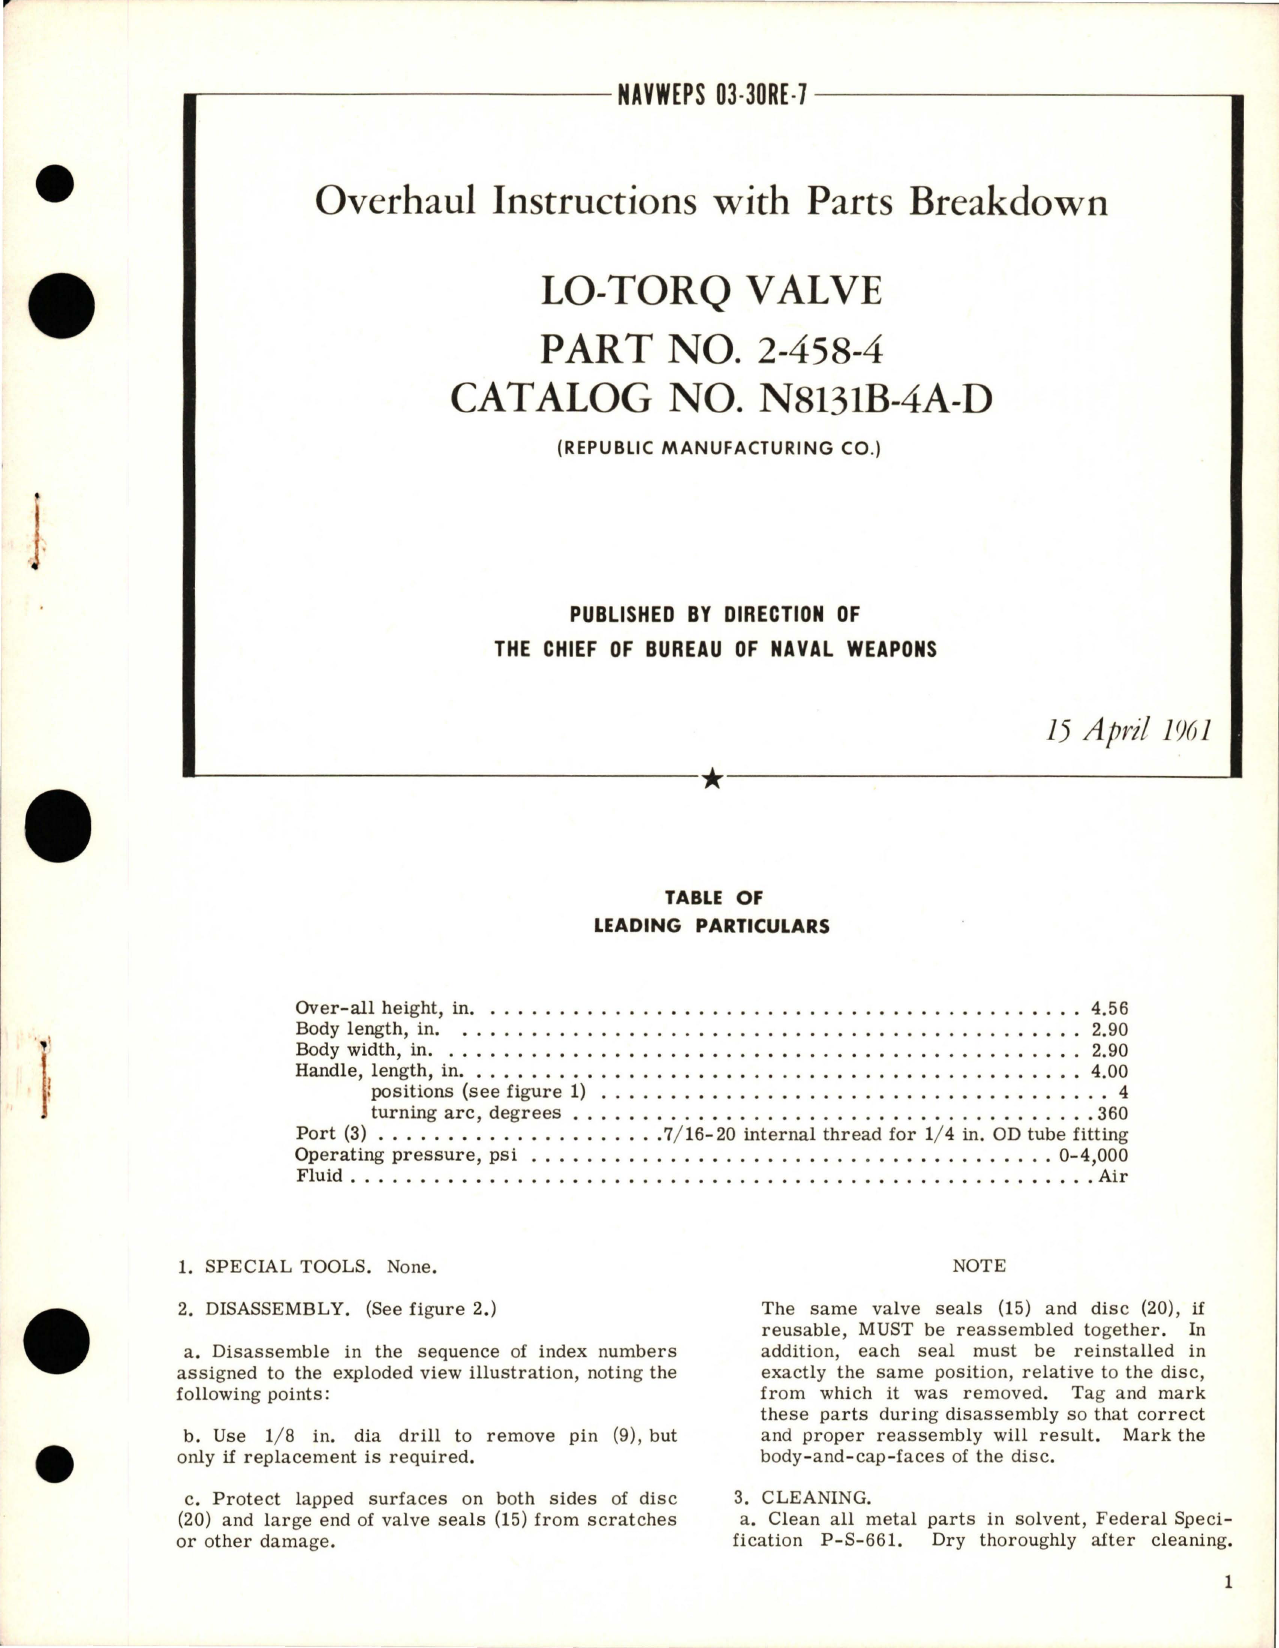 Sample page 1 from AirCorps Library document: Overhaul Instructions with Parts Breakdown for LO-TORQ Valve - Part 2-458-4